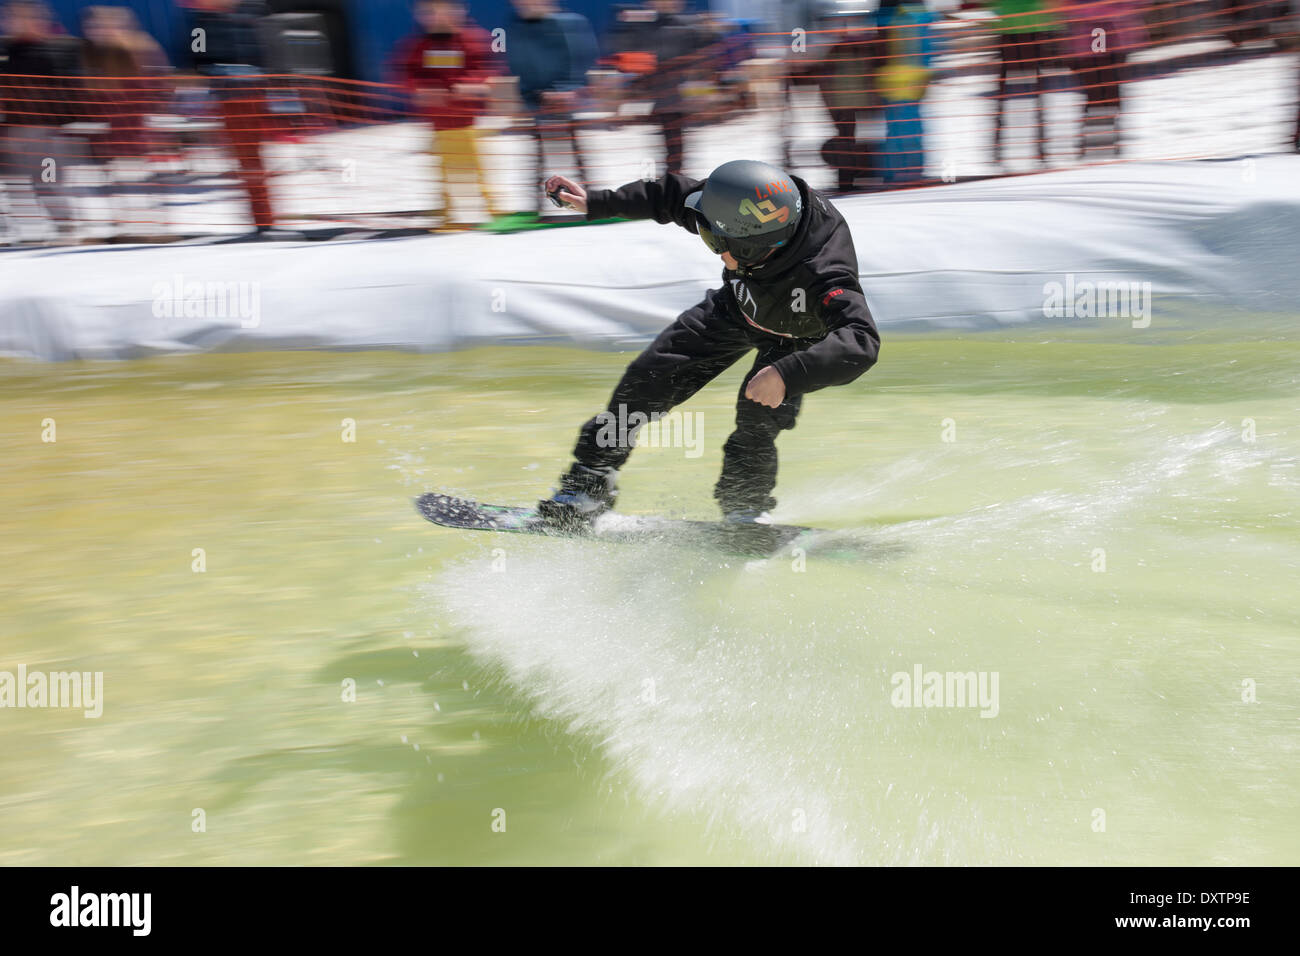 London, Ontario, Canada. 30th Mar, 2014. It has been a good year at Boler Mountain with skiing starting in November and likely running till the first weekend in March. At the end of each year the club holds its annual Slush Bowl, were contestants try to make it across a pool at the bottom of a run. Some do, many don't but they all wind up a little cold and wet at the end. Credit:  Mark Spowart/Alamy Live News Stock Photo